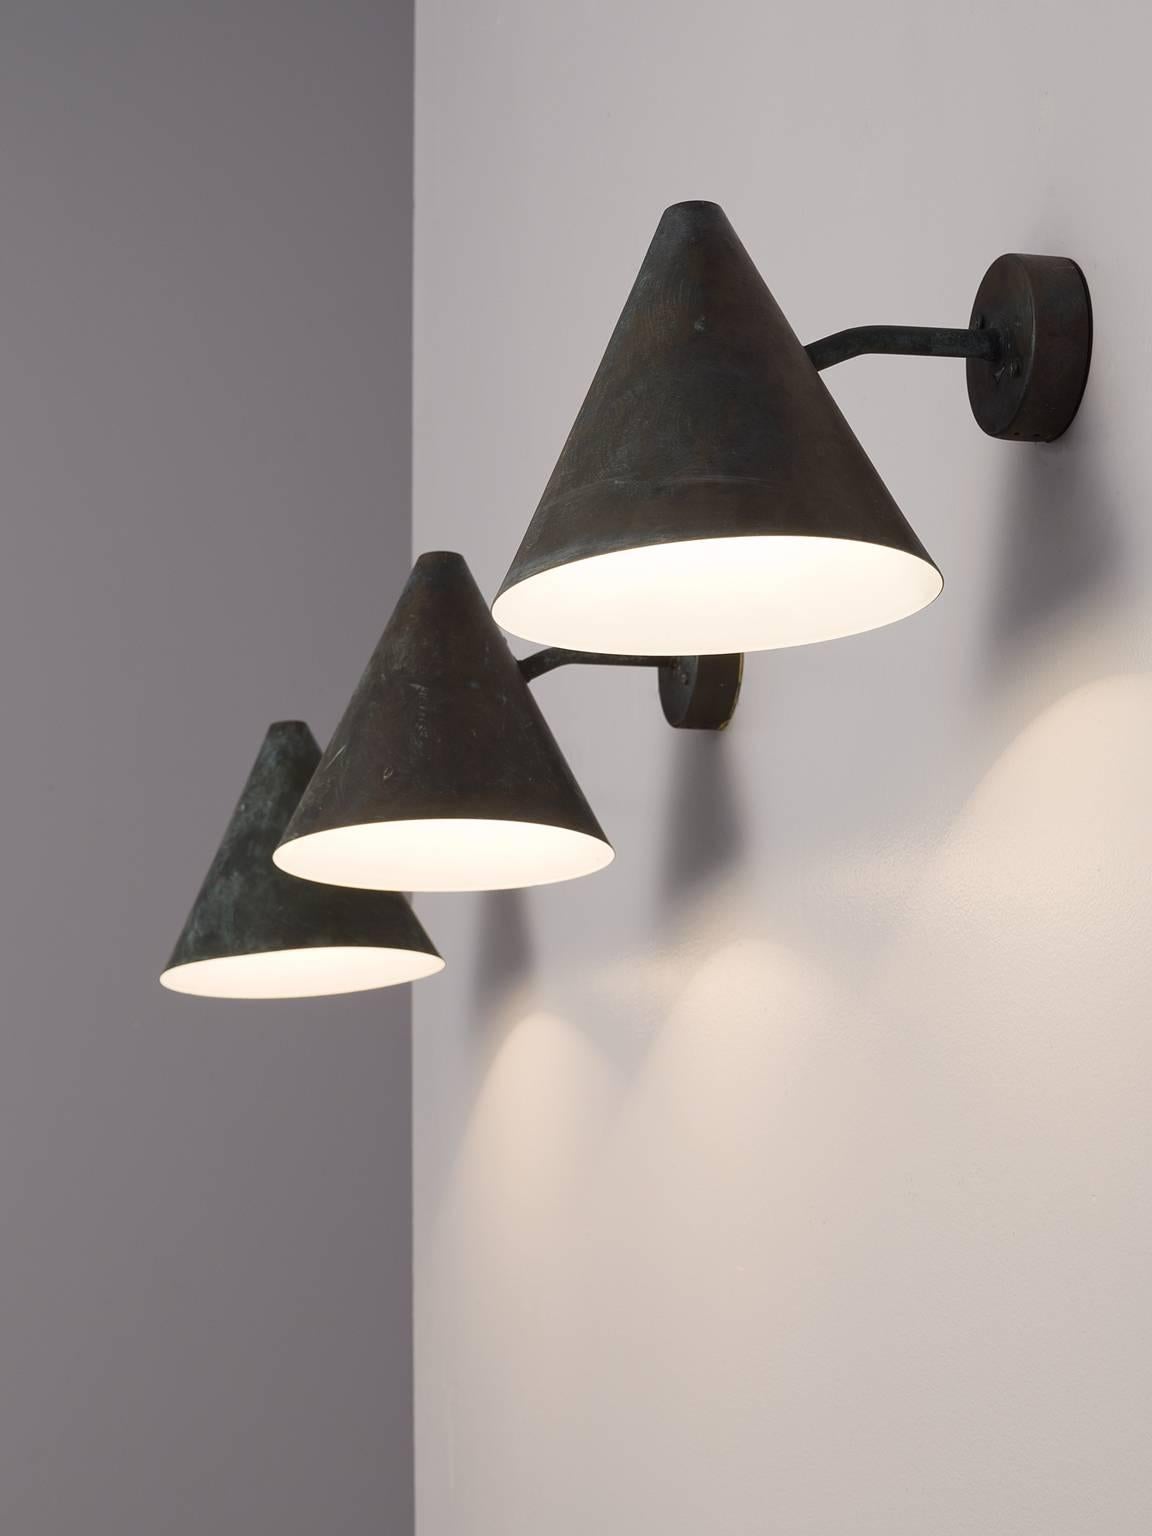 Set of nine wall lights, in copper, by Hans-Agne Jakobsson for AB Markaryd, Sweden, 1950s. 

Set of nine cone-shaped wall lights designed by Hans-Agne Jakobsson for AB Markaryd, in beautifully patinated copper with an off-white interior. The light